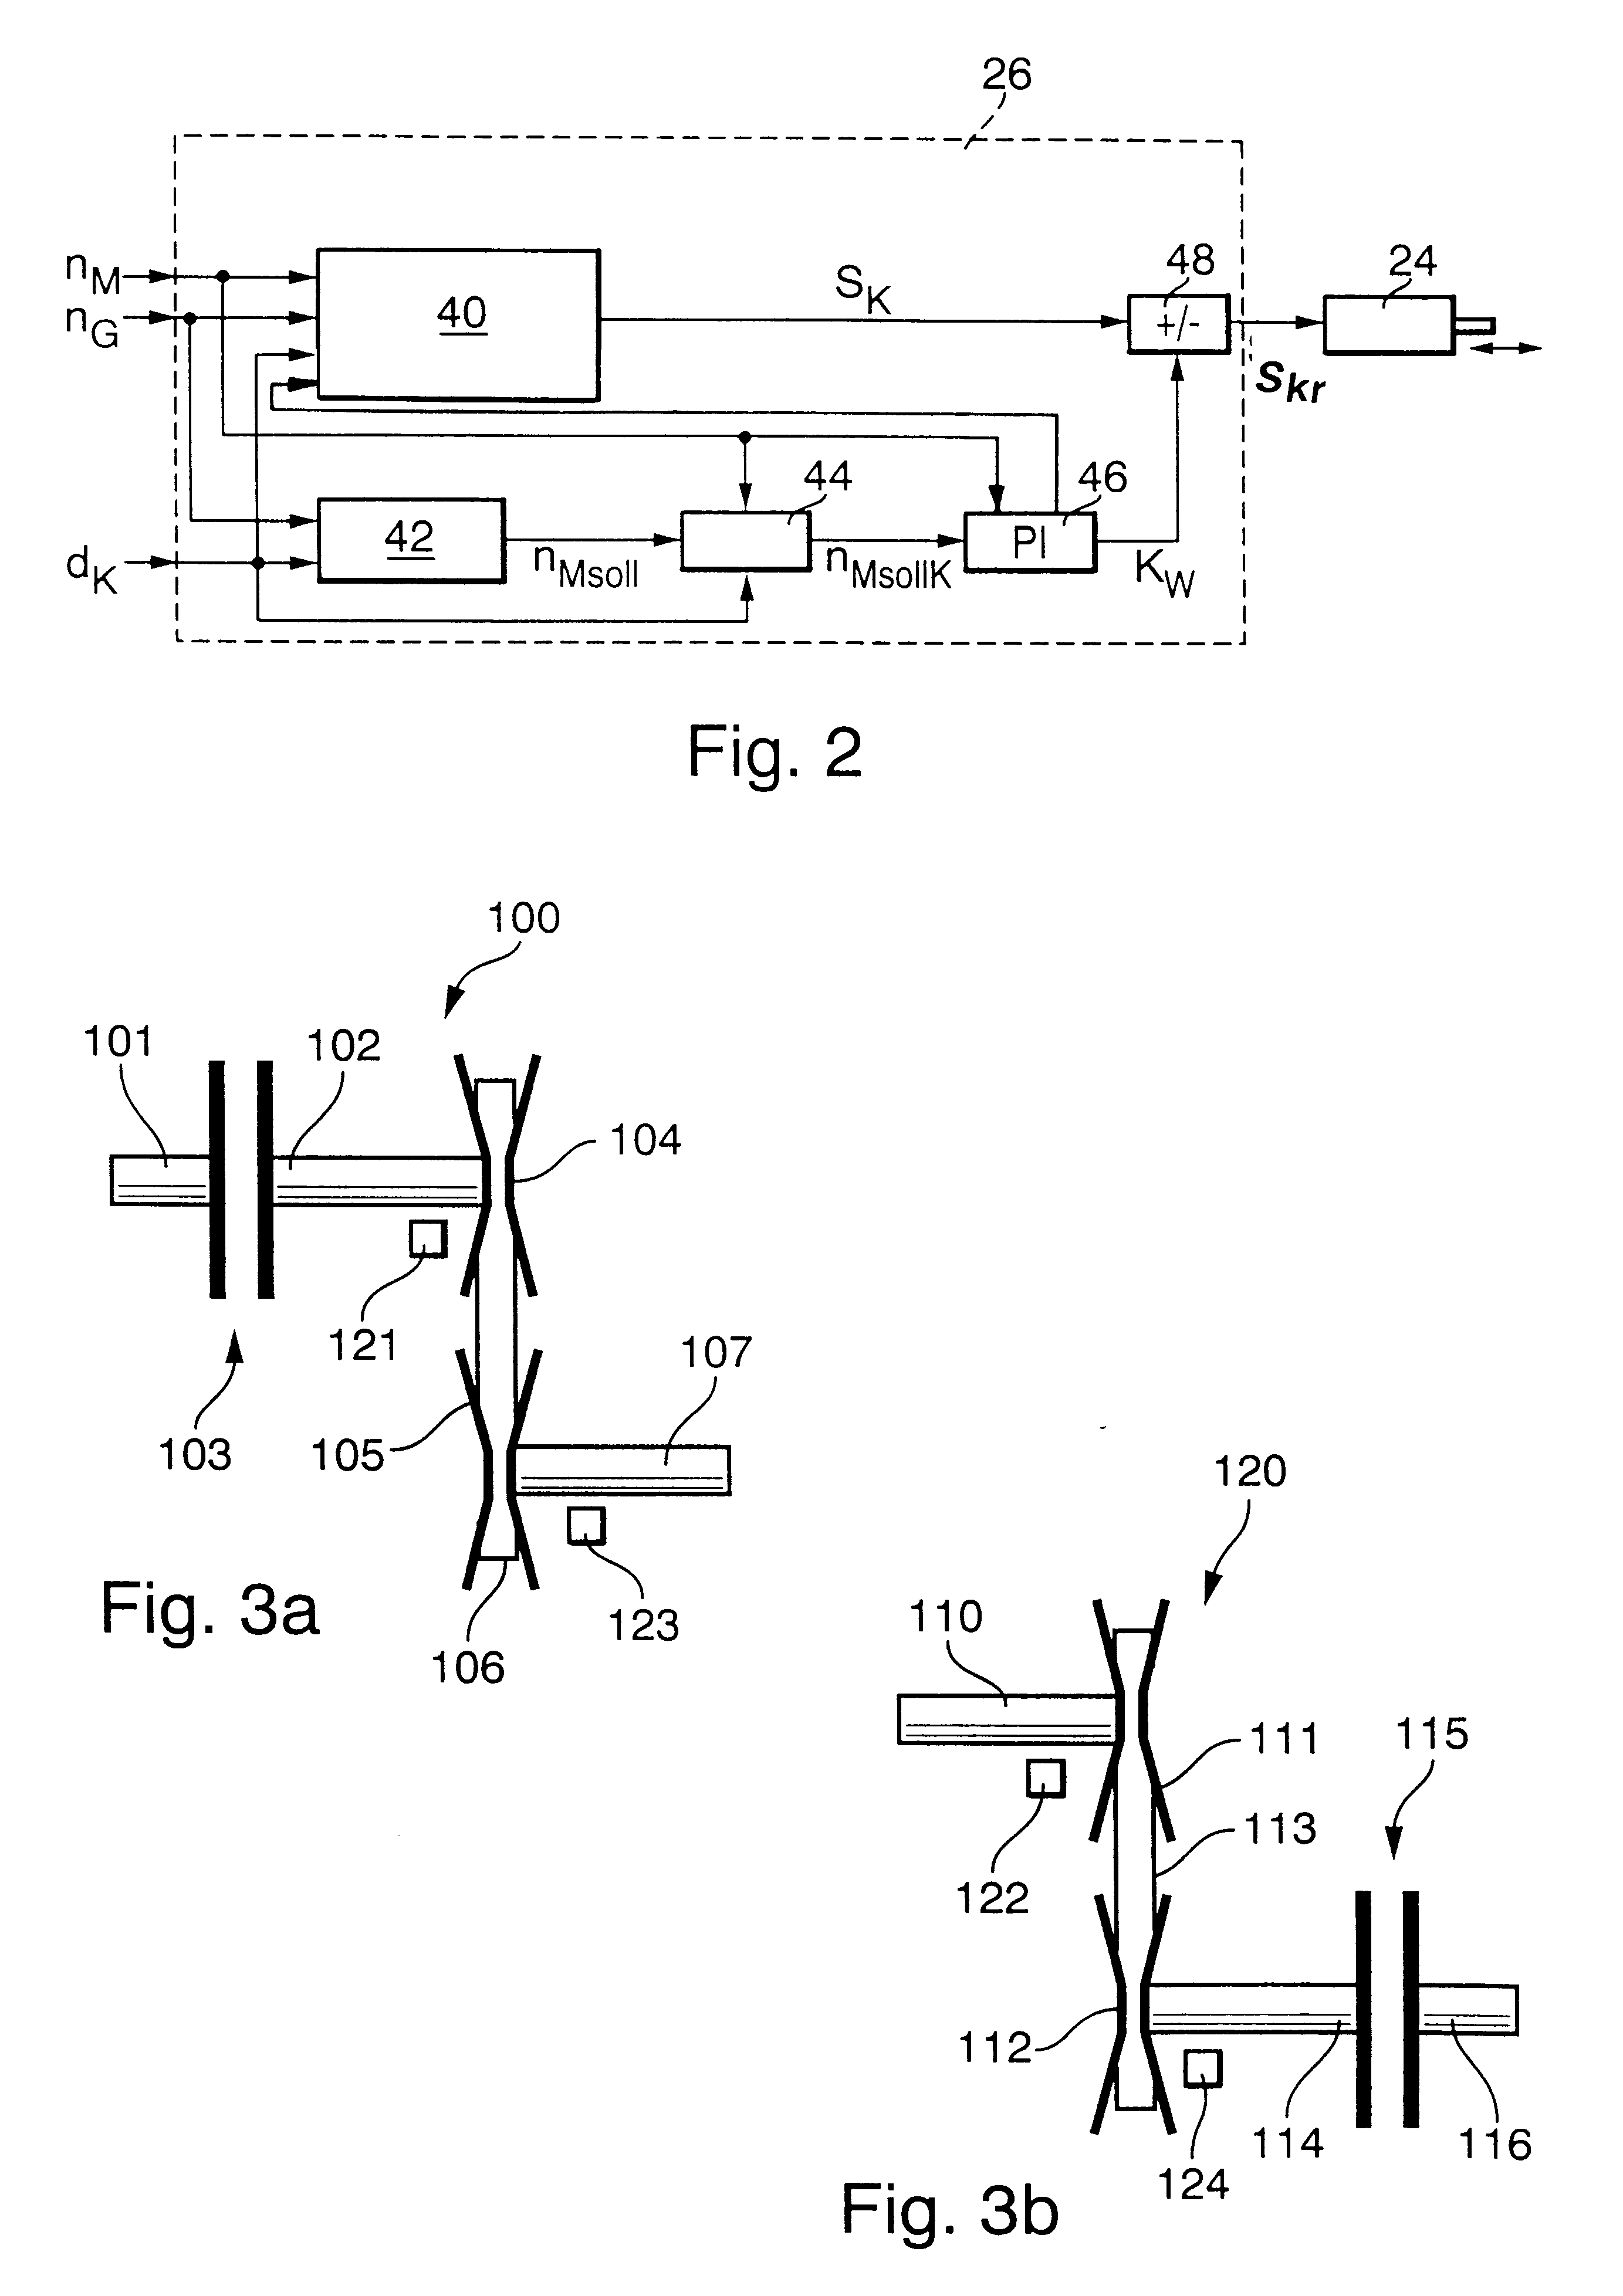 Method of and apparatus for controlling the operation of a clutch in the power train of a motor vehicle